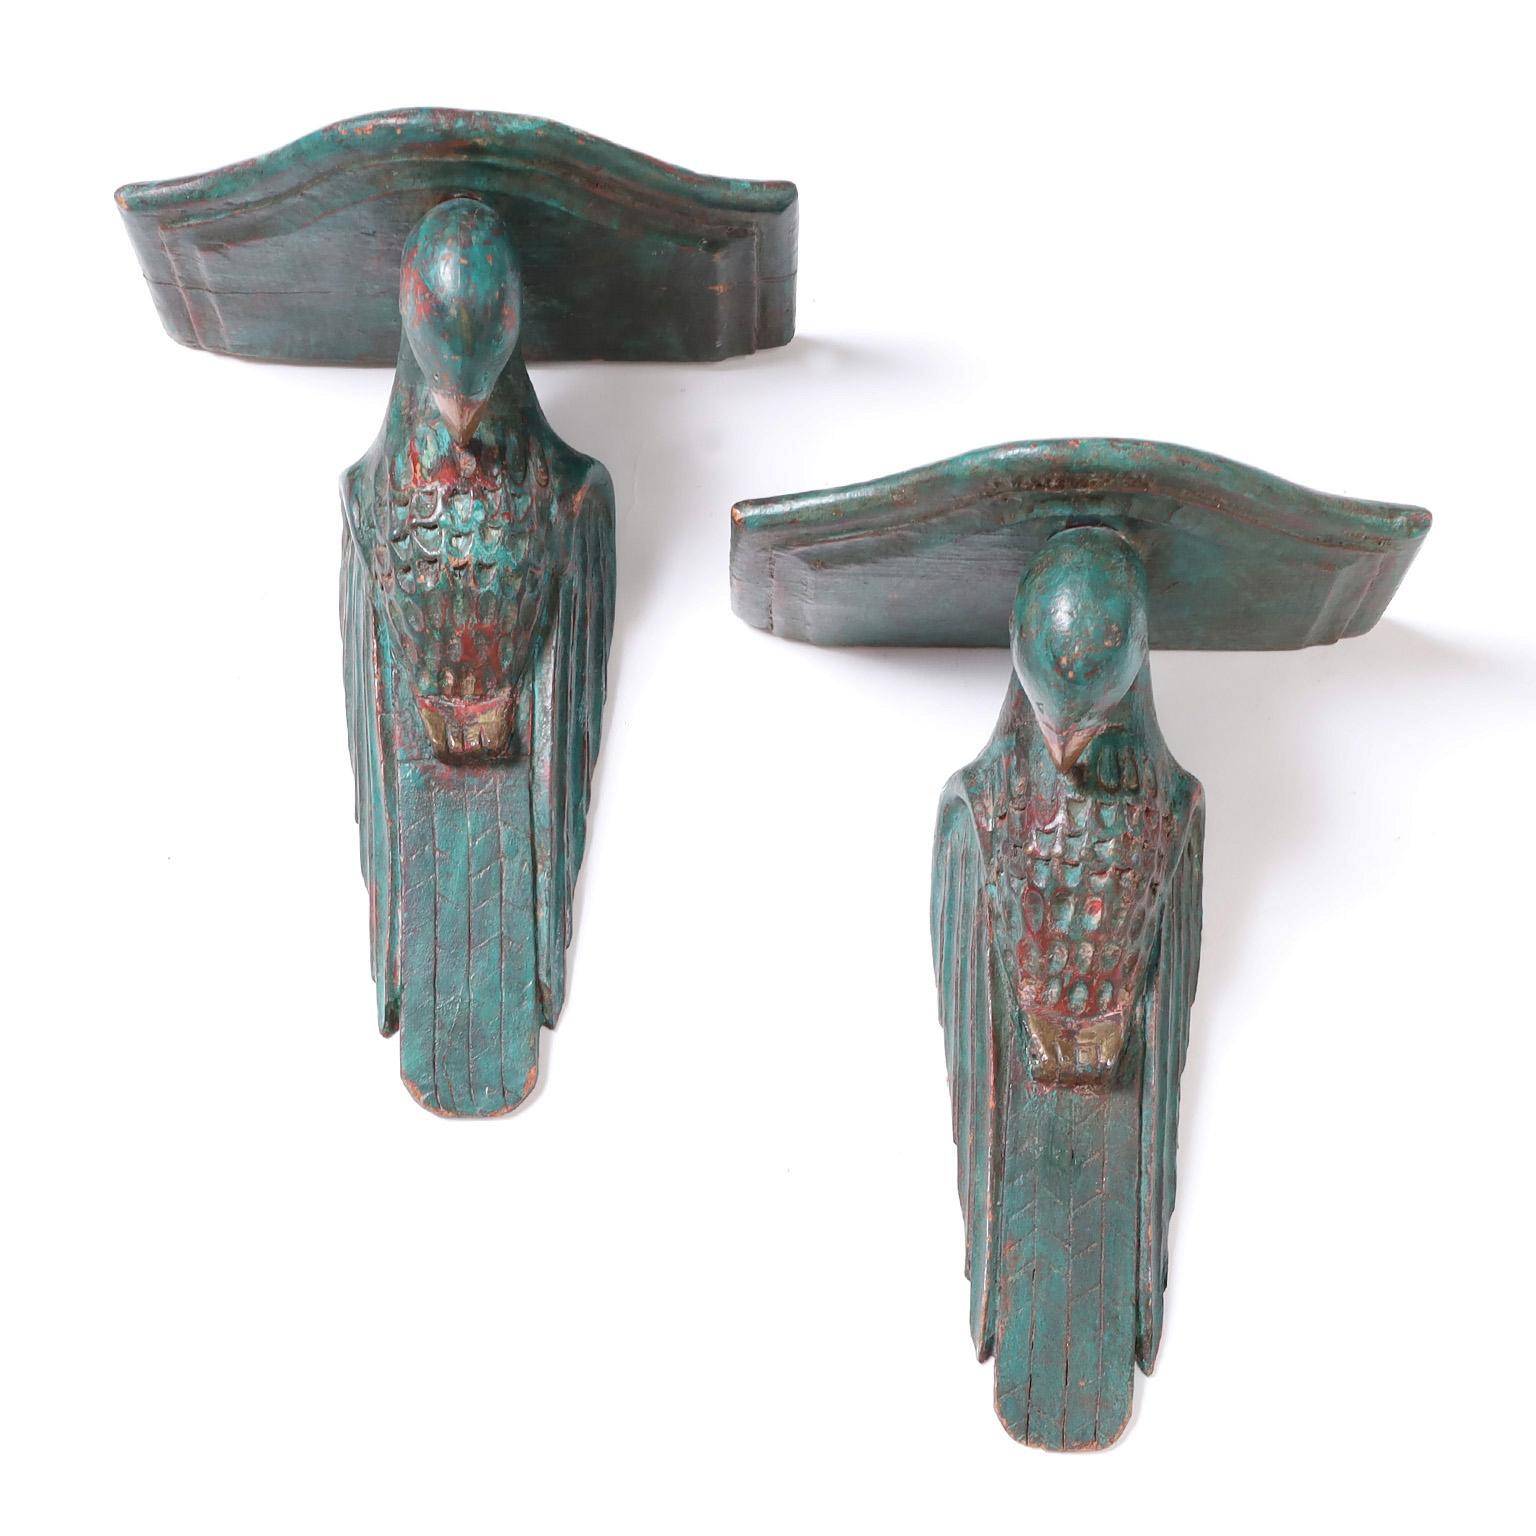 Antique pair of Anglo Indian Art Deco brackets or wall shelves carved from indigenous hardwood and painted over red primer now worn to perfection.